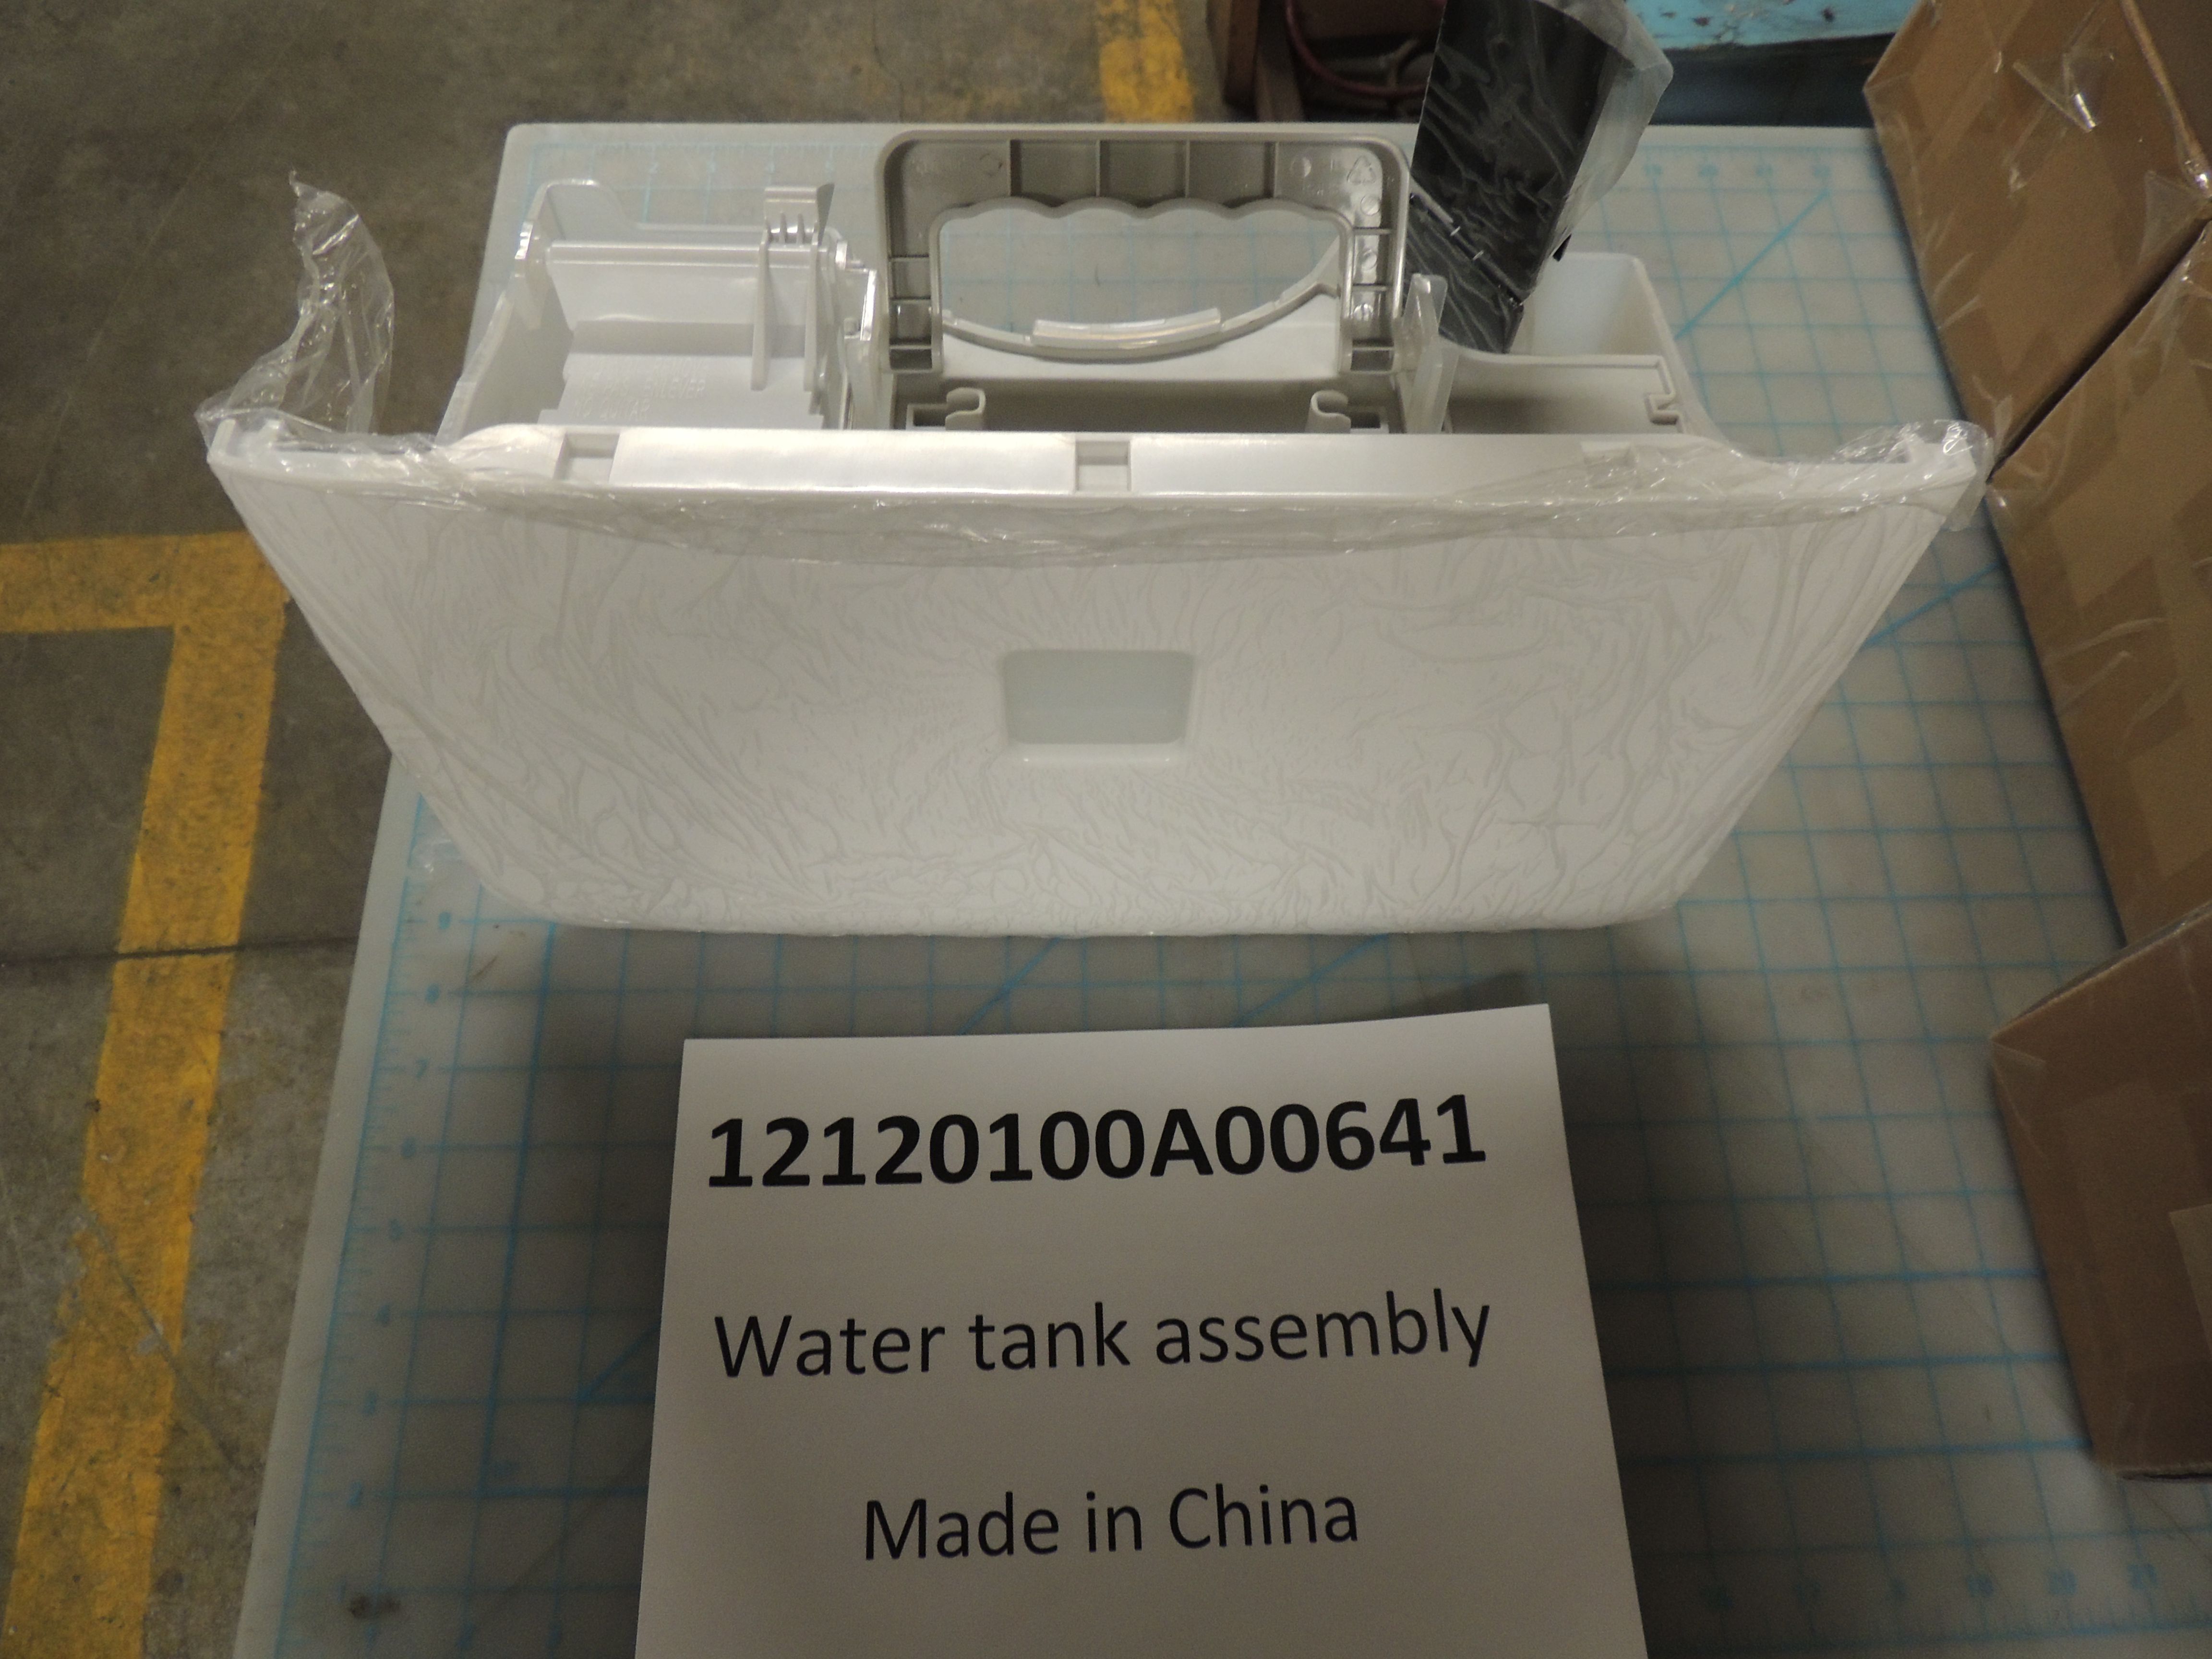 Water tank assembly